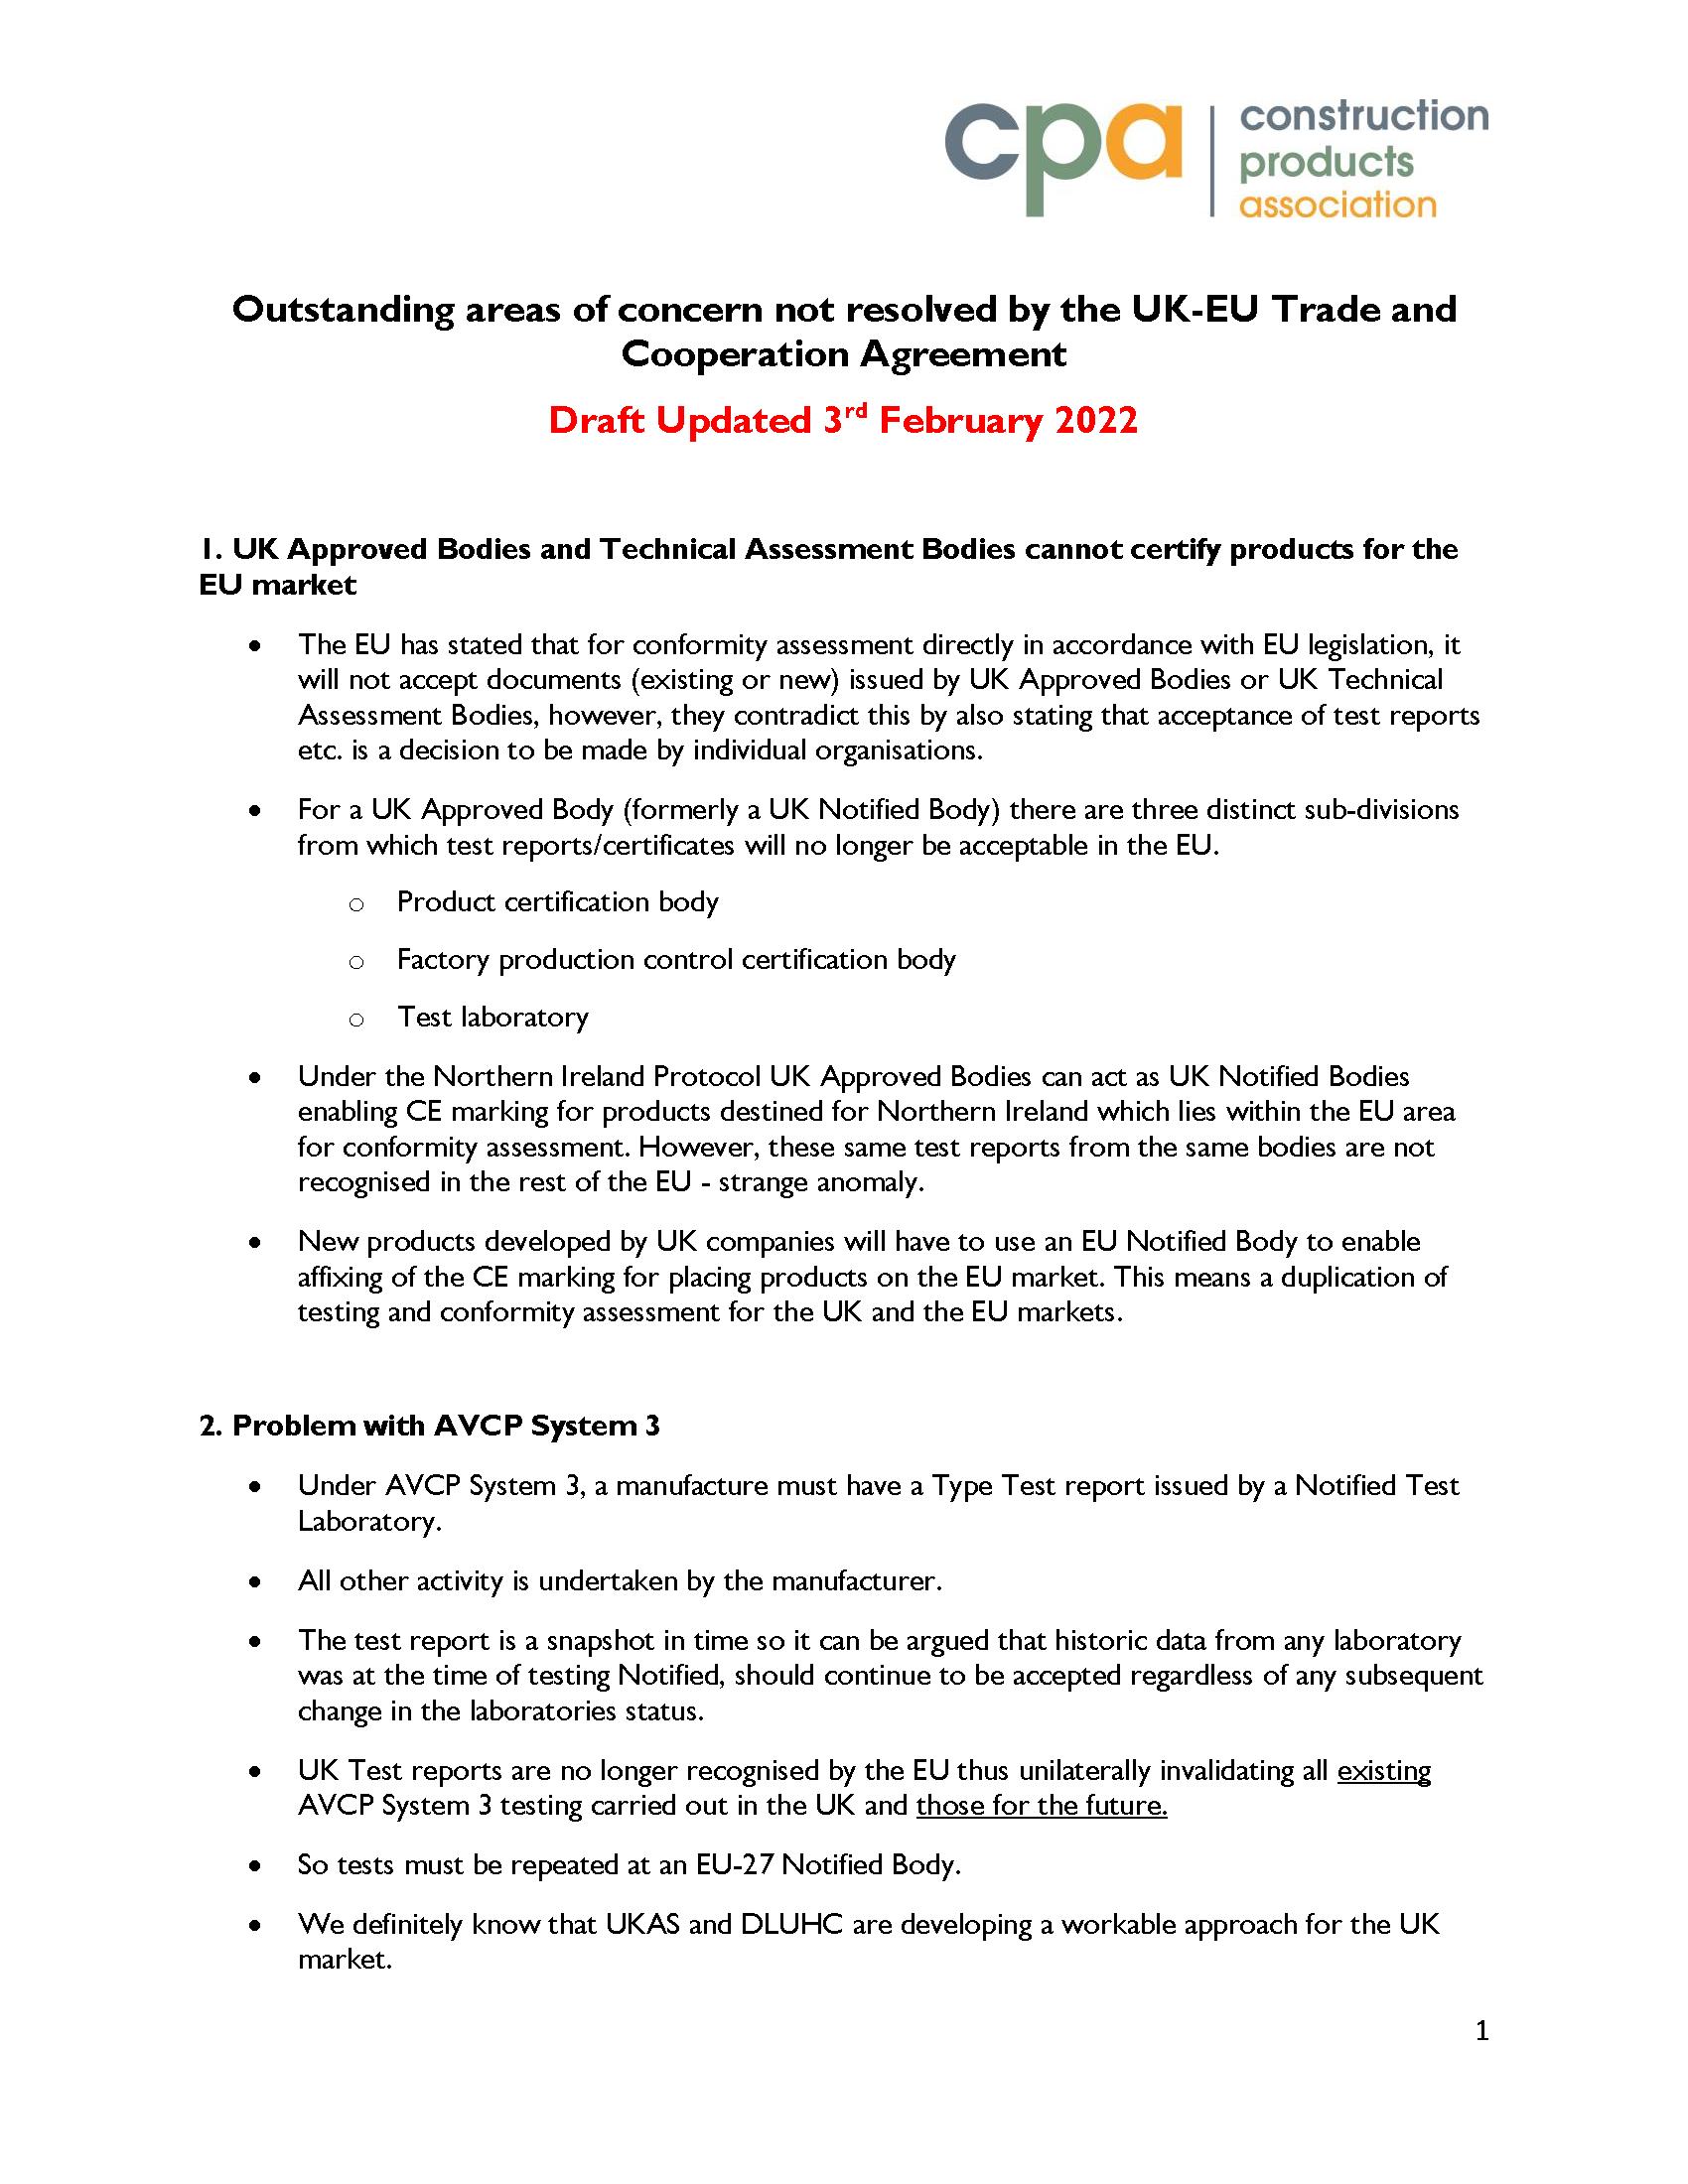 Outstanding area of concern not resolved by the UK-EU Trade and Cooperation Agreement